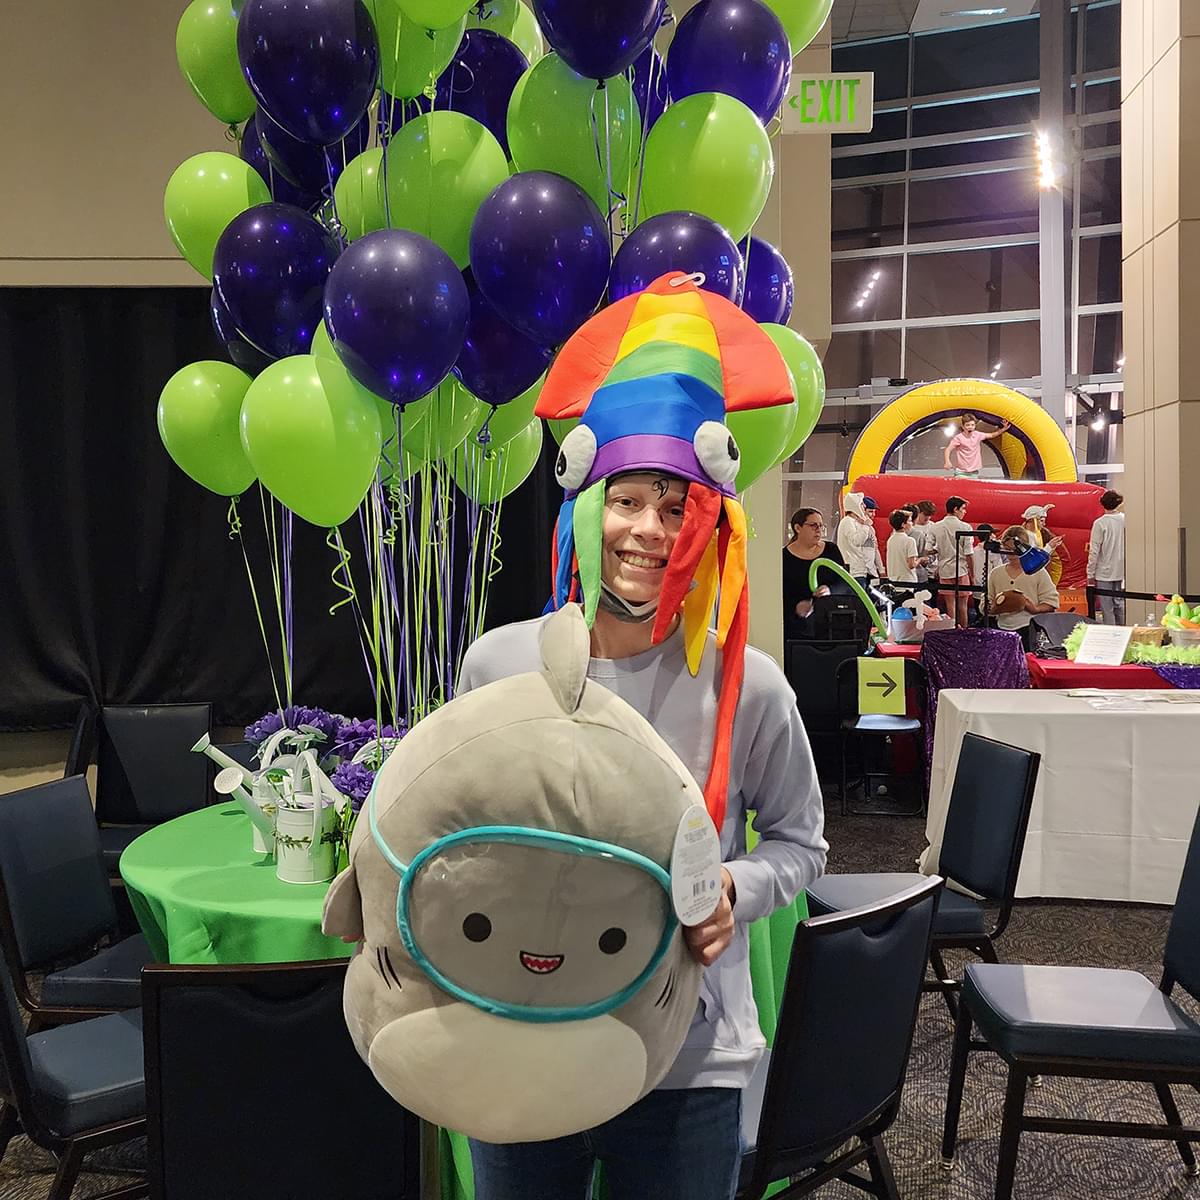 Adlyn, a teenage oncology patient, with the rainbow squid hat on holding a large stuffed cartoon character in front of green and purple balloons and a bounce house in the distance.